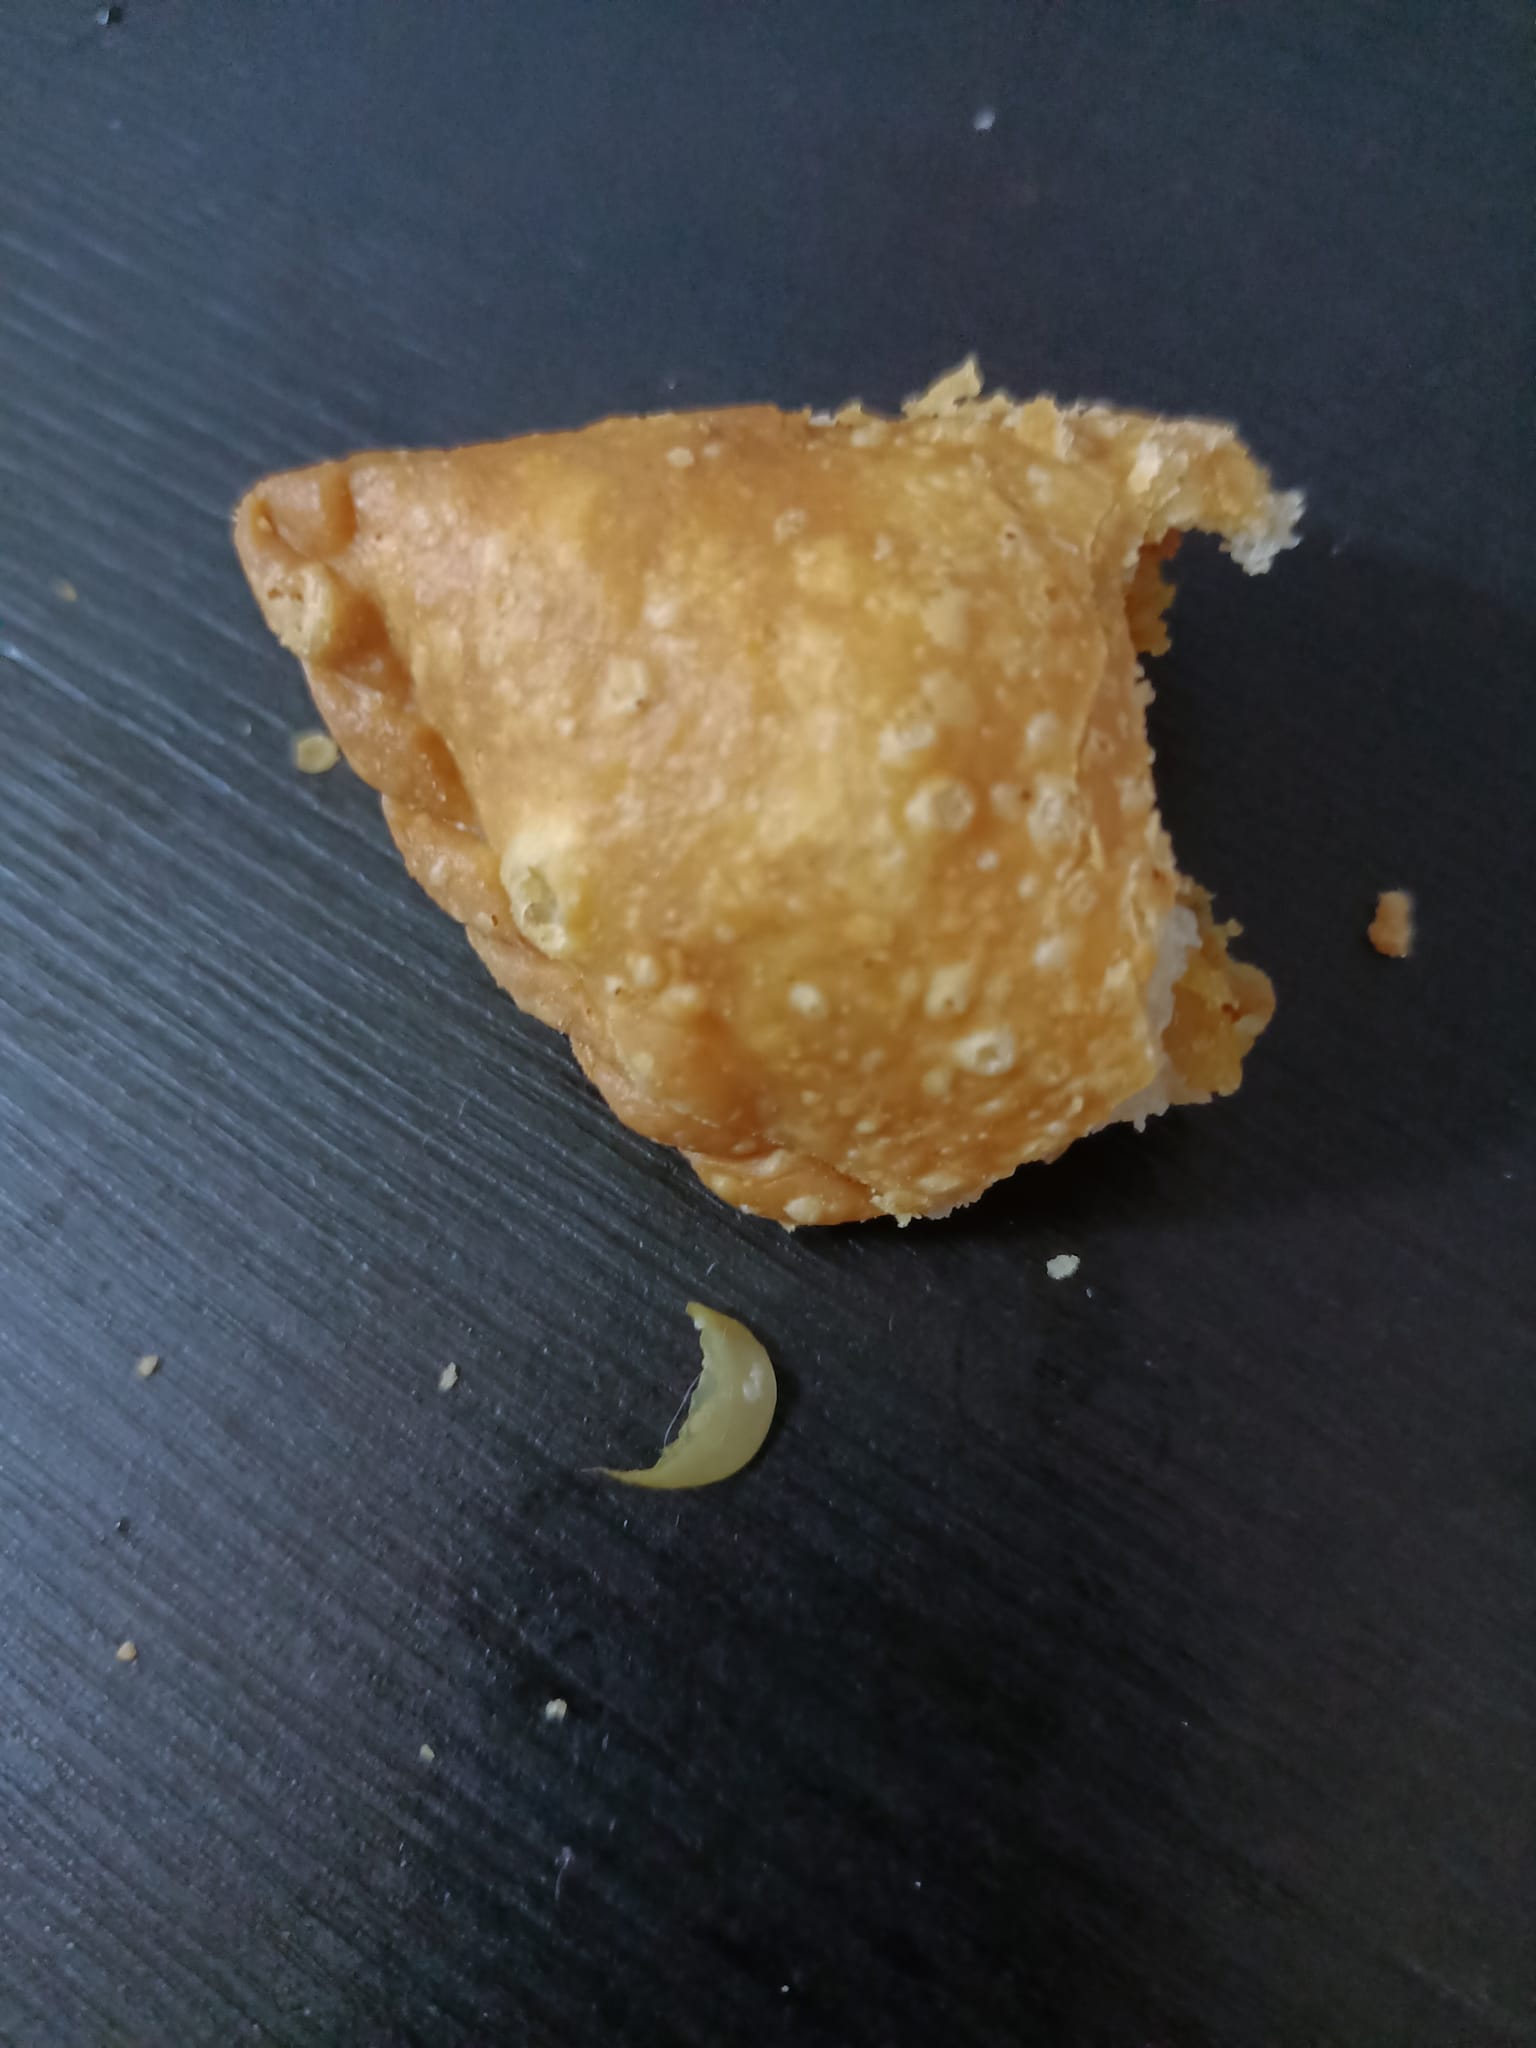 Extra ingredient found in woman's curry puff.